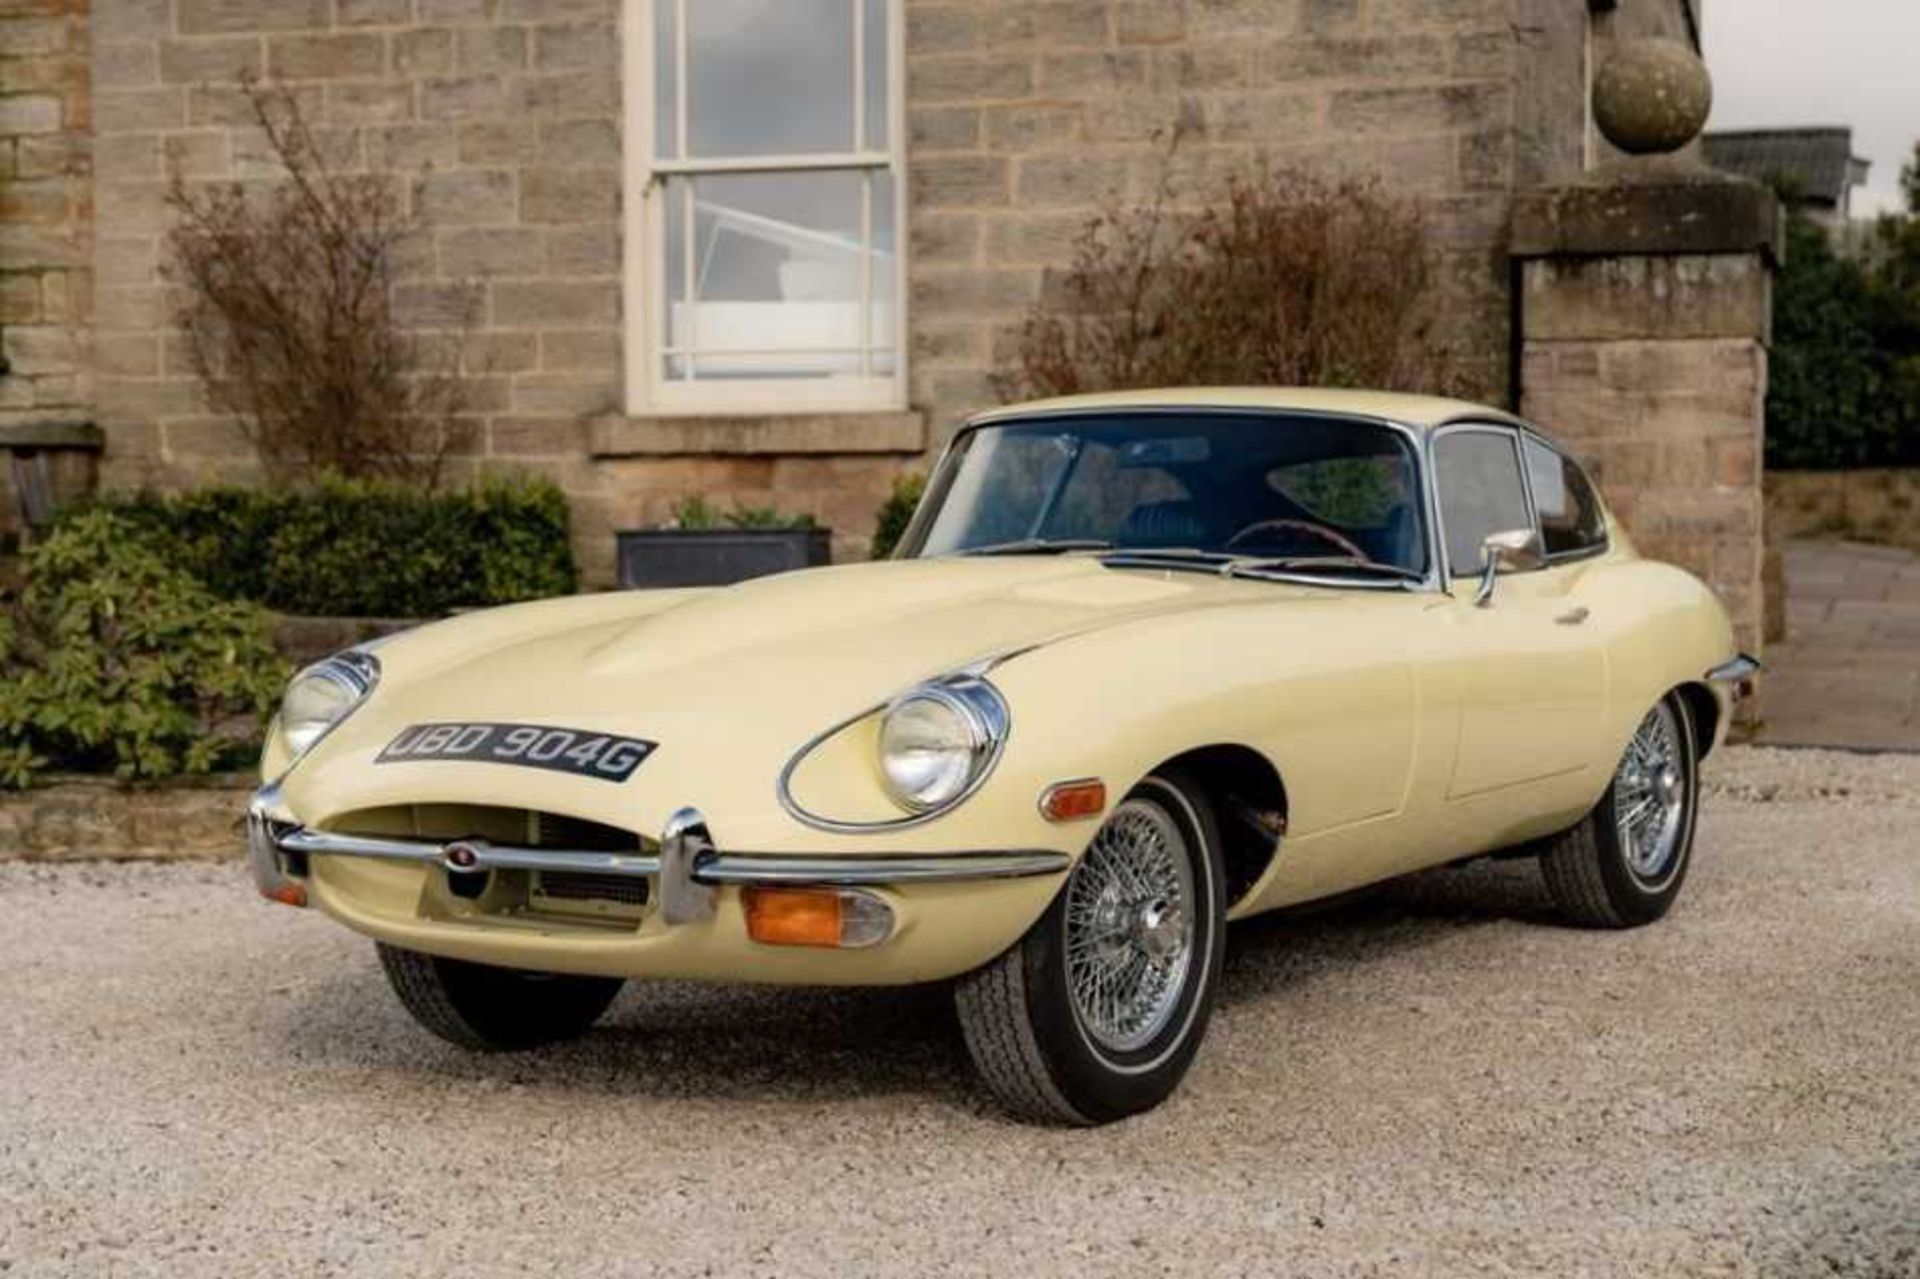 1968 Jaguar E-Type 4.2 Litre Coupe Genuine 44,000 miles from new - Image 66 of 68